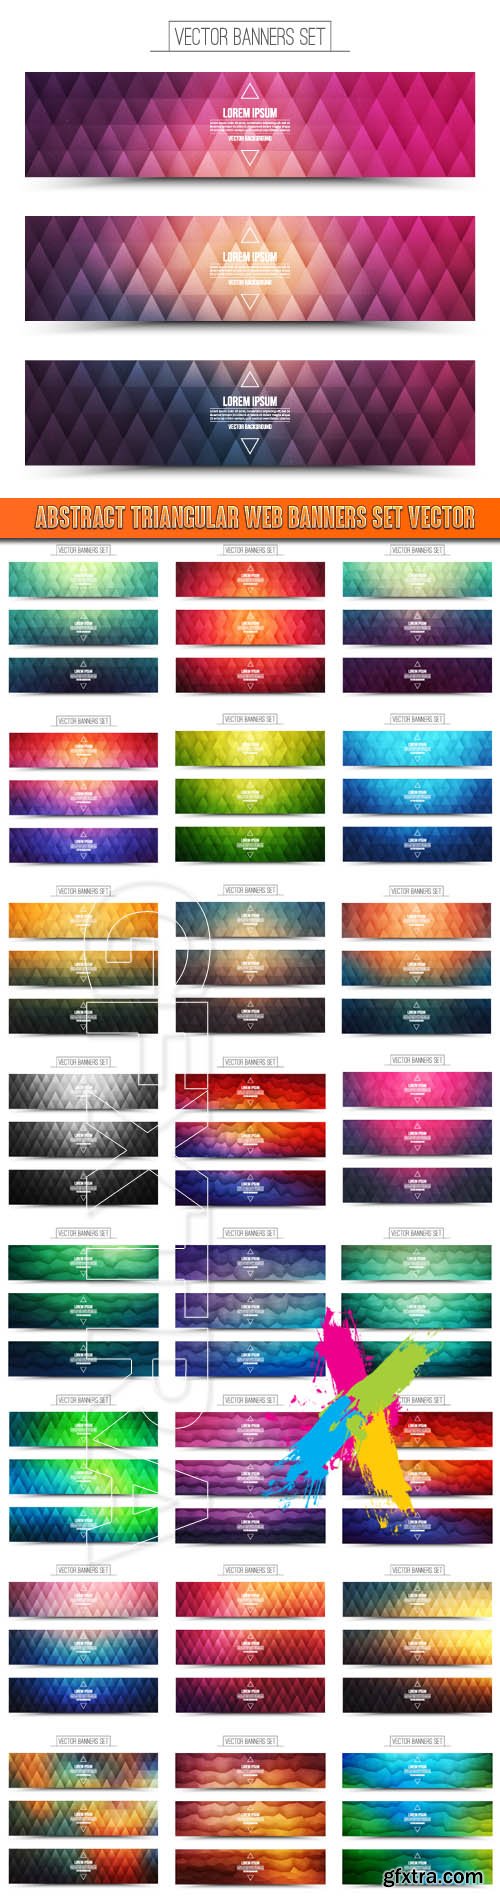 Abstract triangular web banners set vector